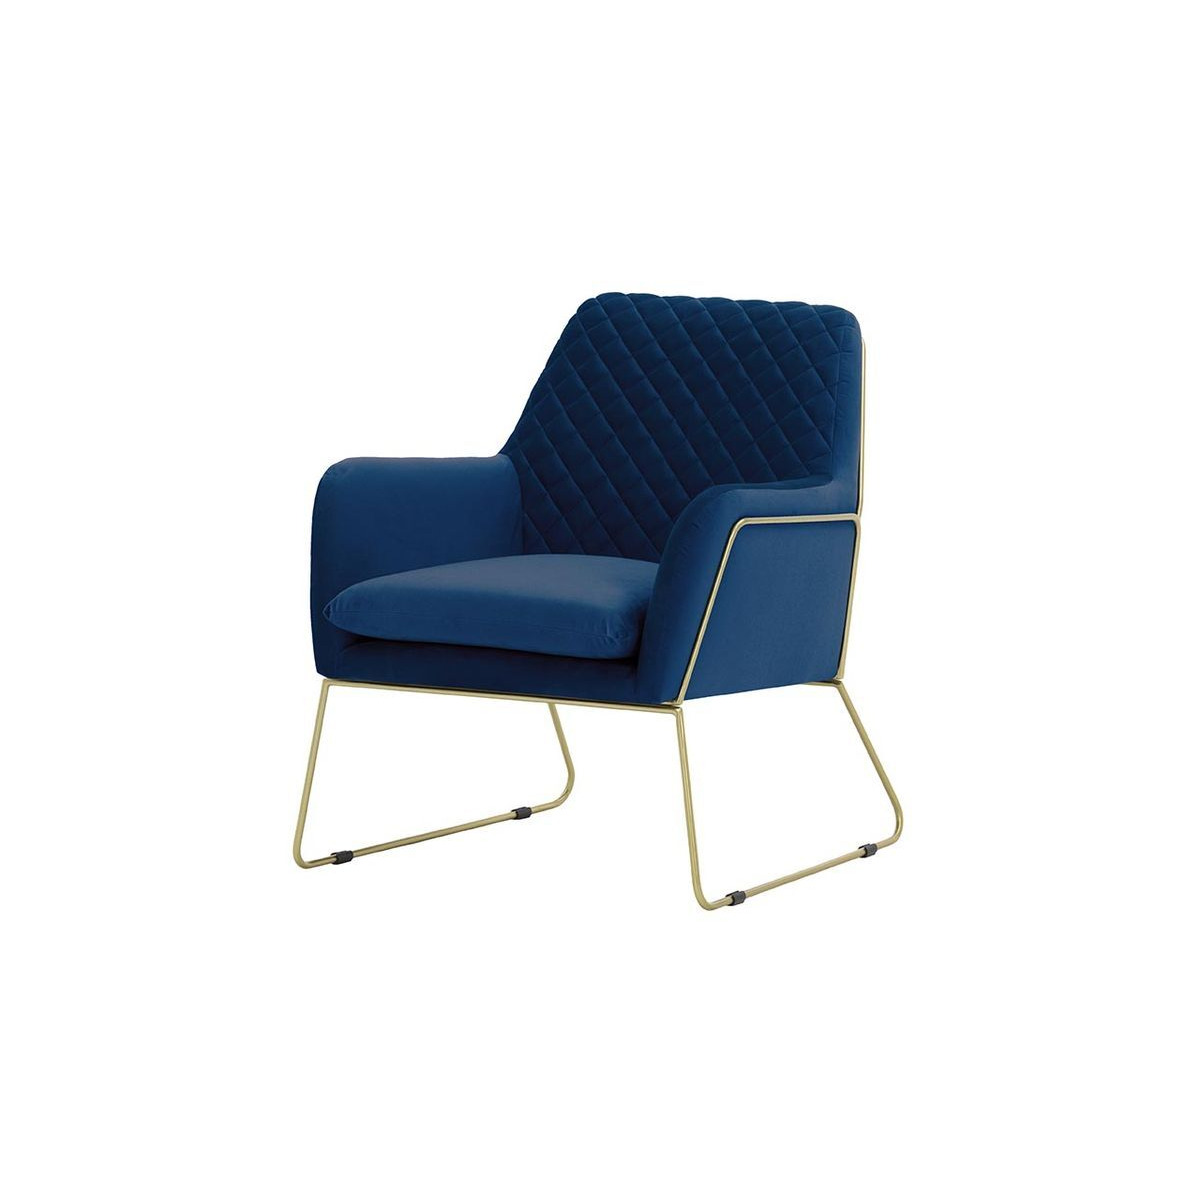 Foxe Metal Frame Armchair with Stitching, blue, Leg colour: gold metal frame - image 1